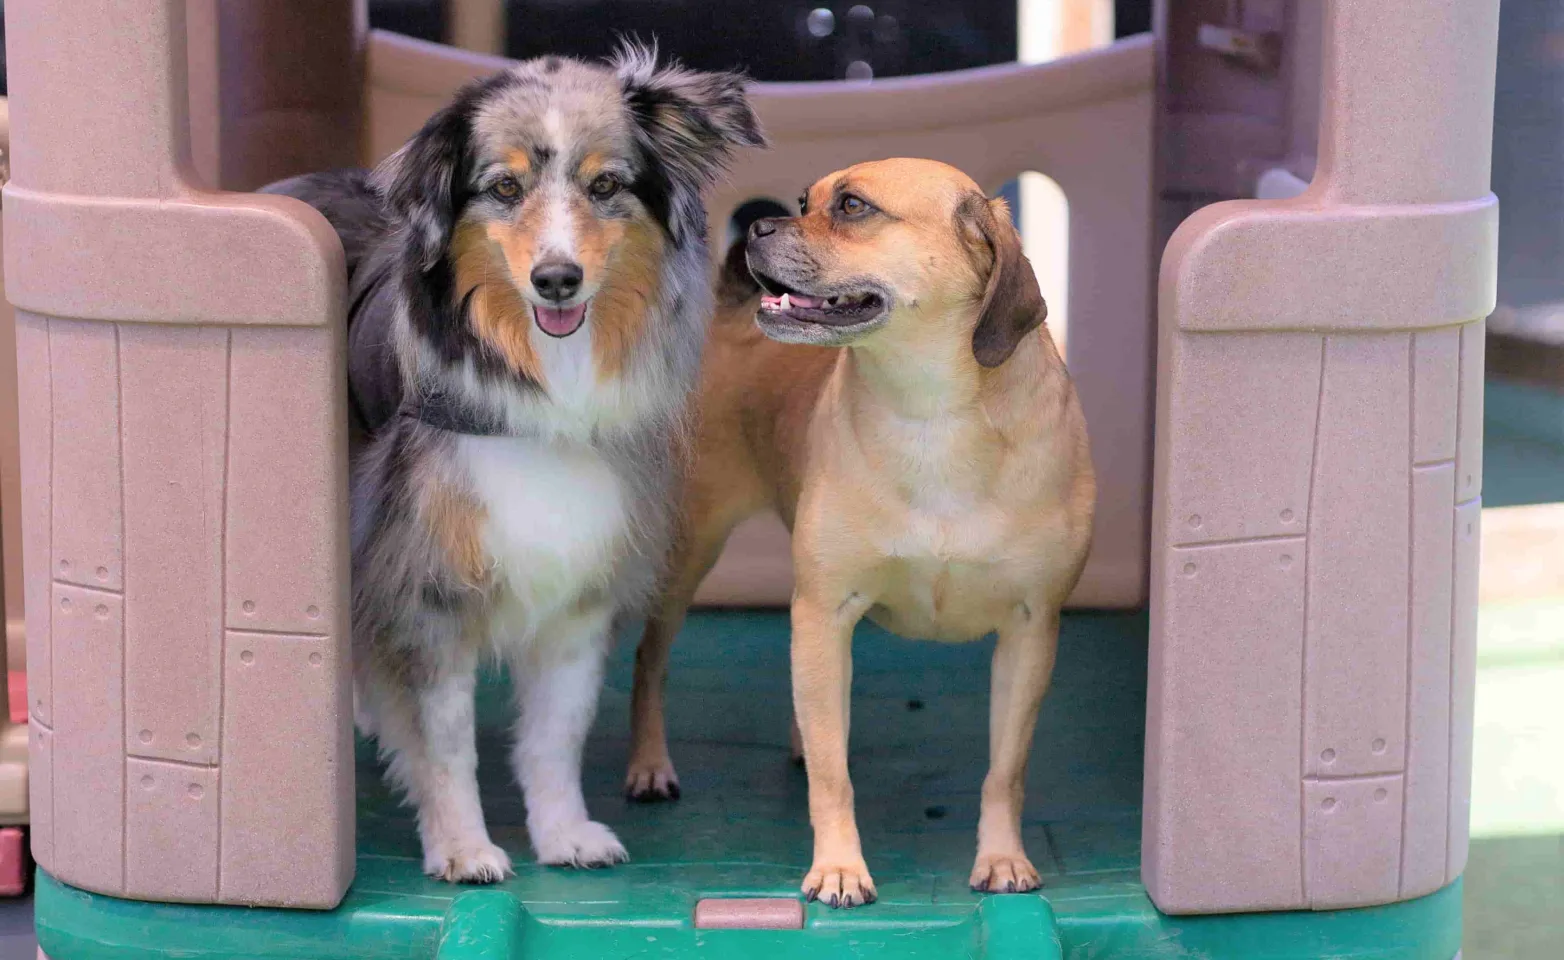 Dogs playing on slide at dog daycare